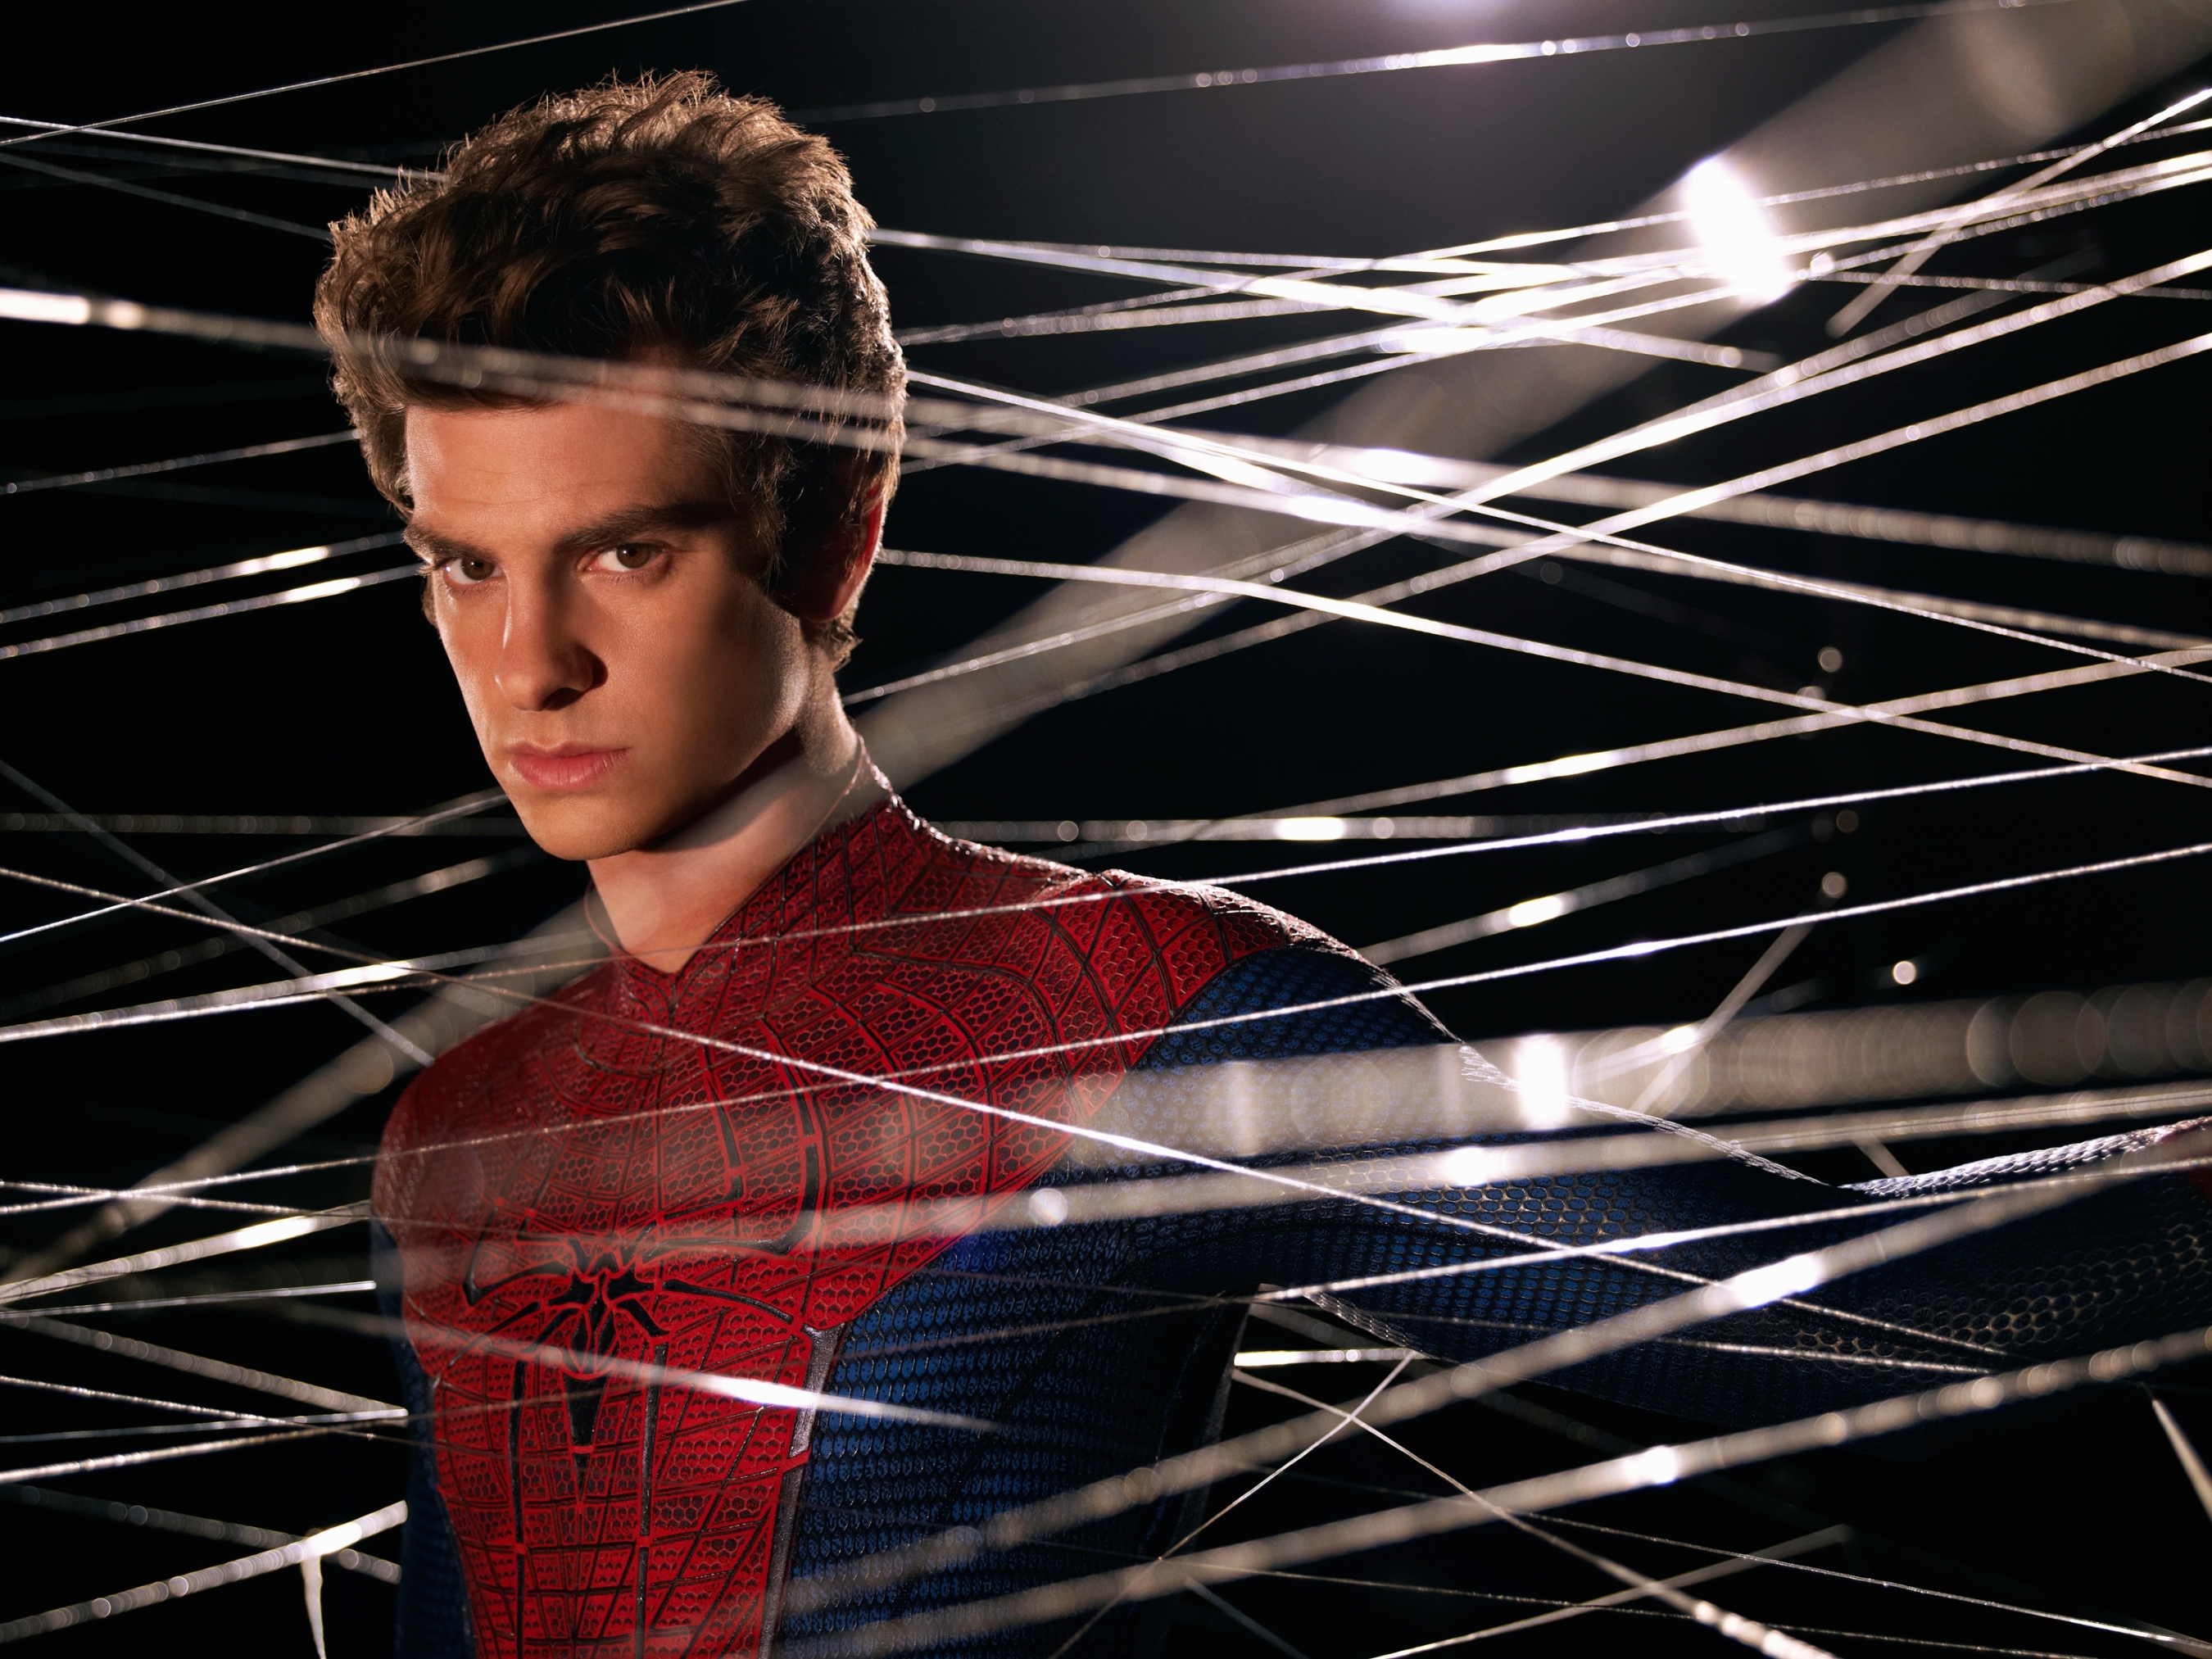 Two New Promo Images for The Amazing Spider-Man see Spidey and Gwen Stacy  Webbed In - HeyUGuys